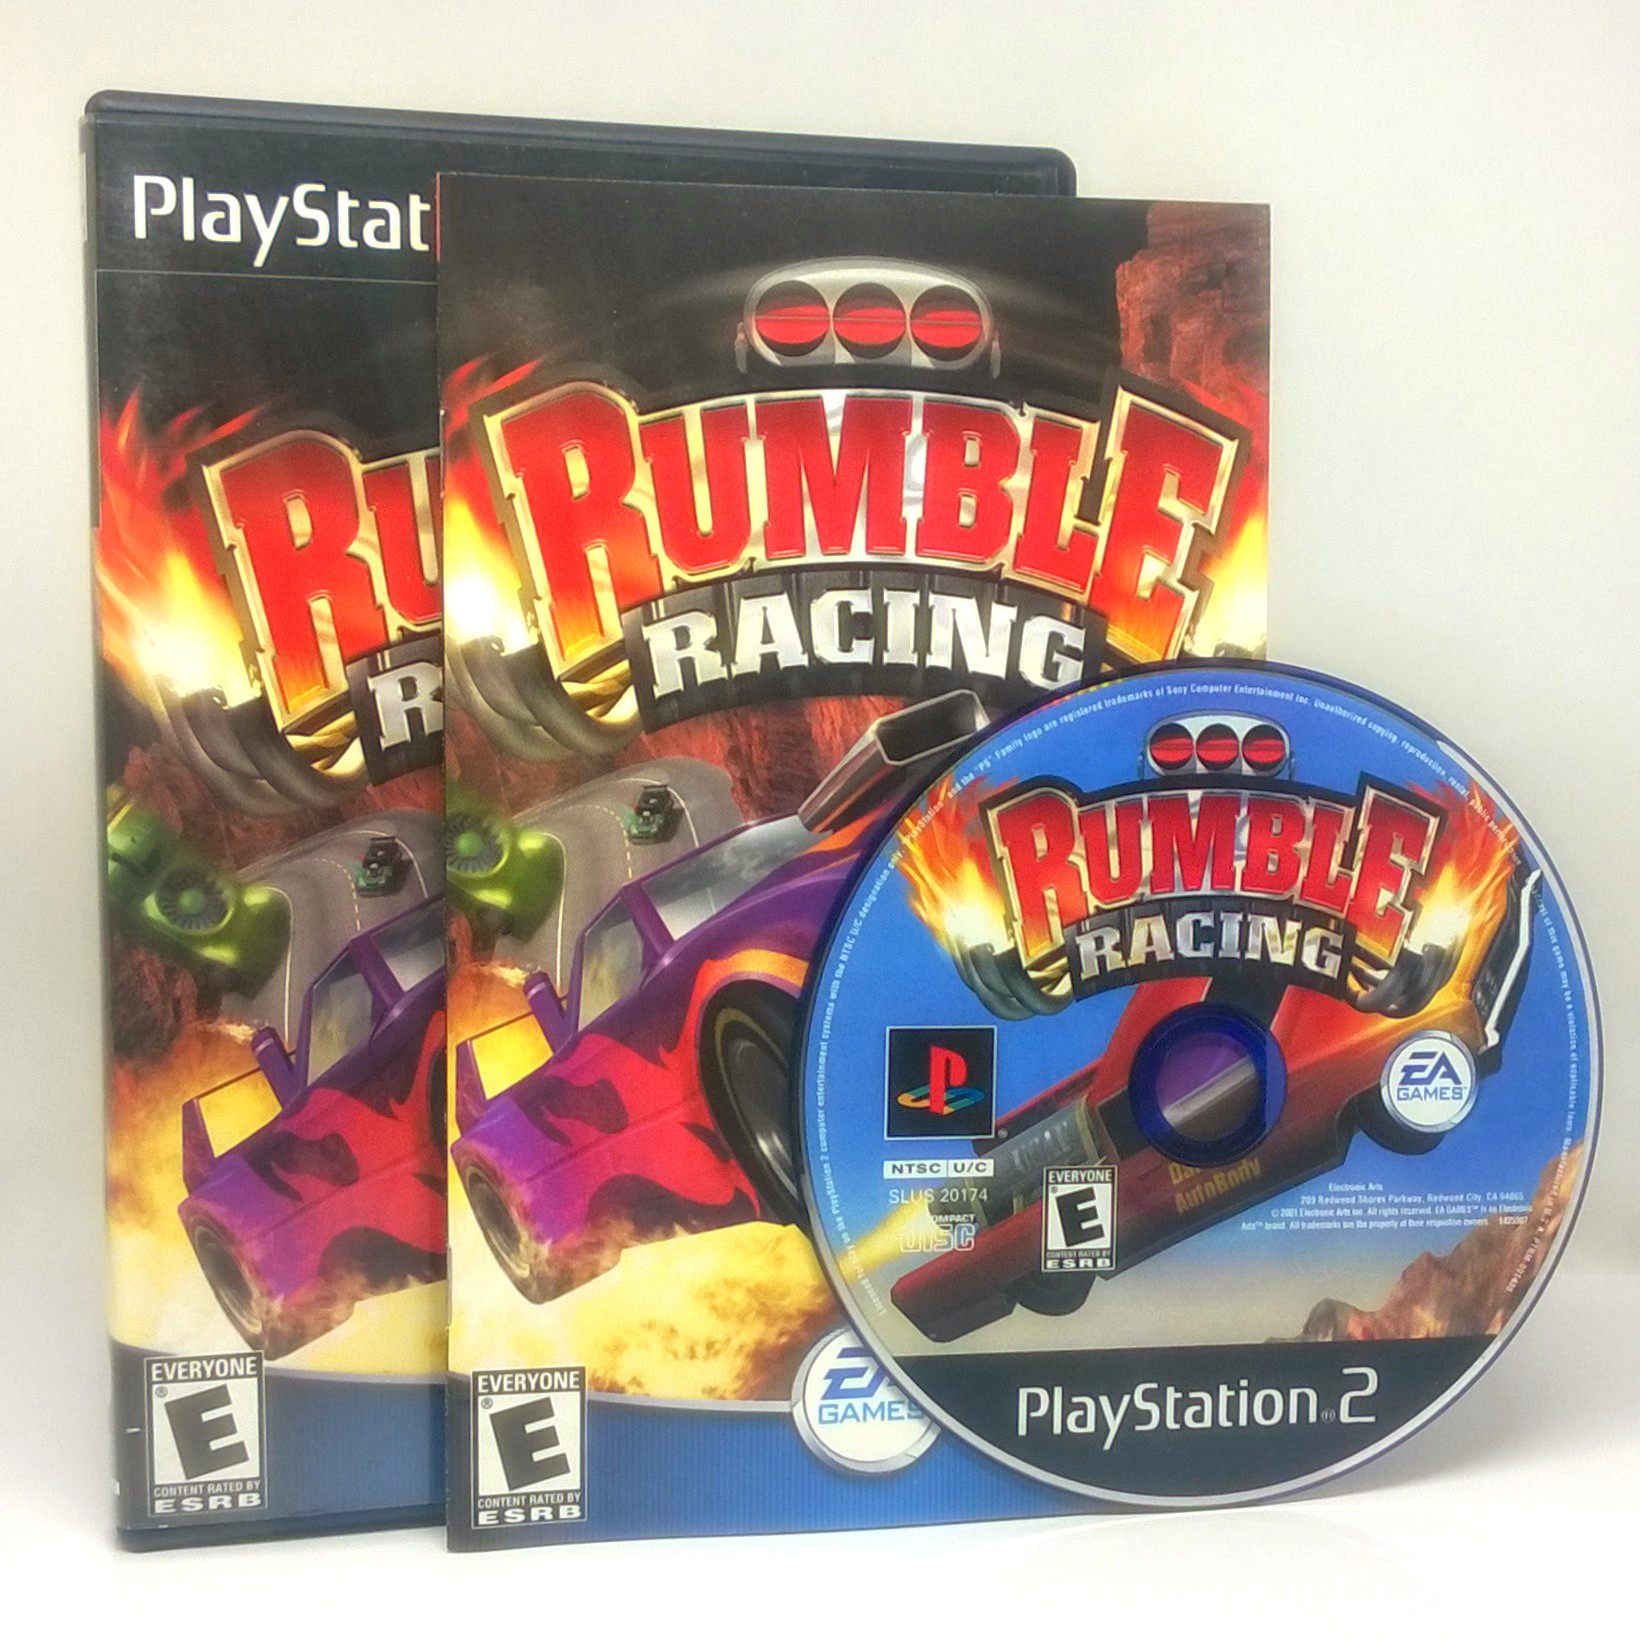 Rumble Racing Sony PlayStation 2 Game